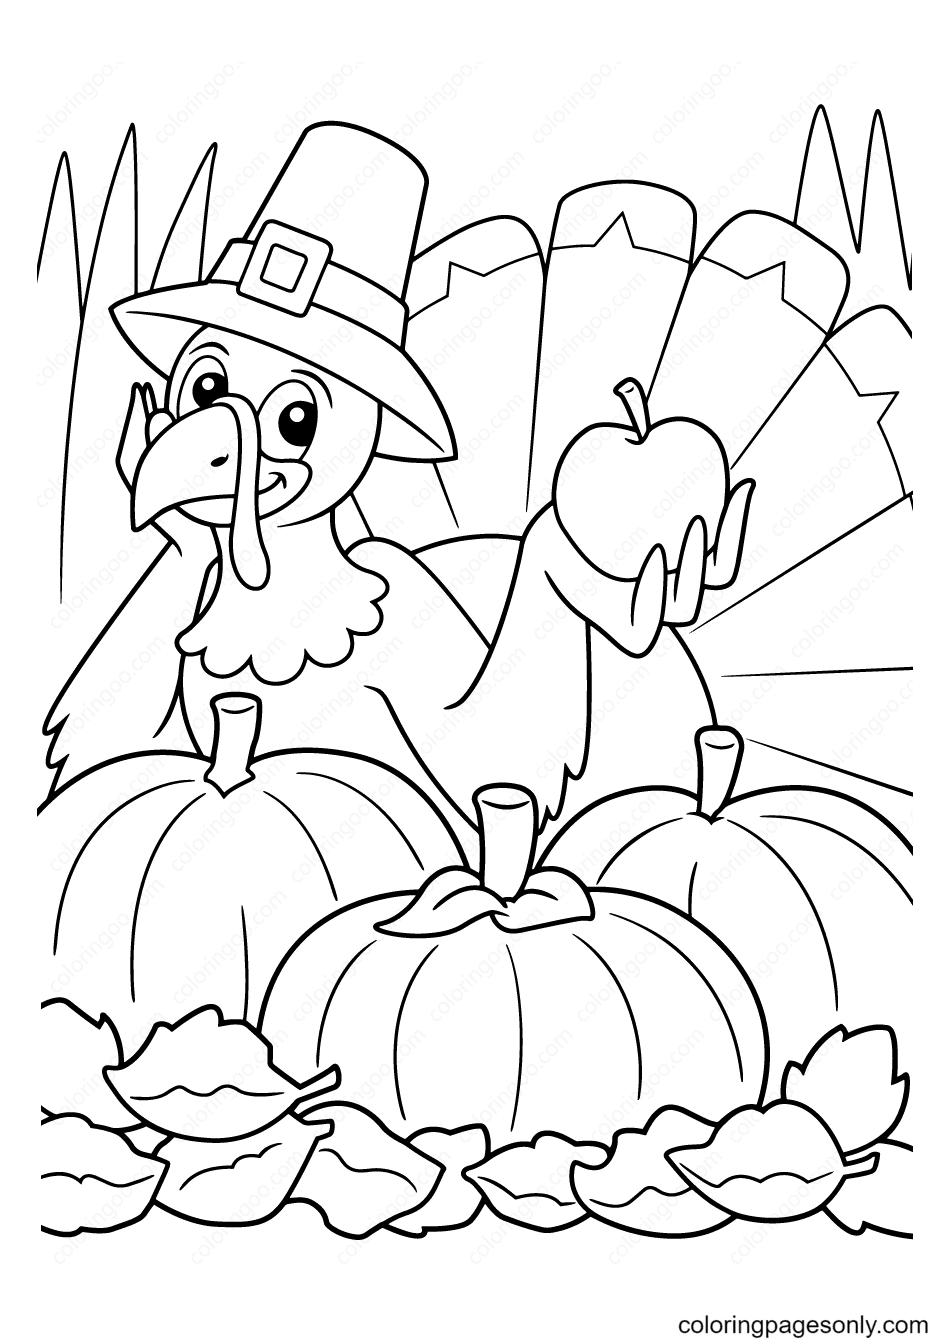 Thanksgiving coloring pages printable for free download